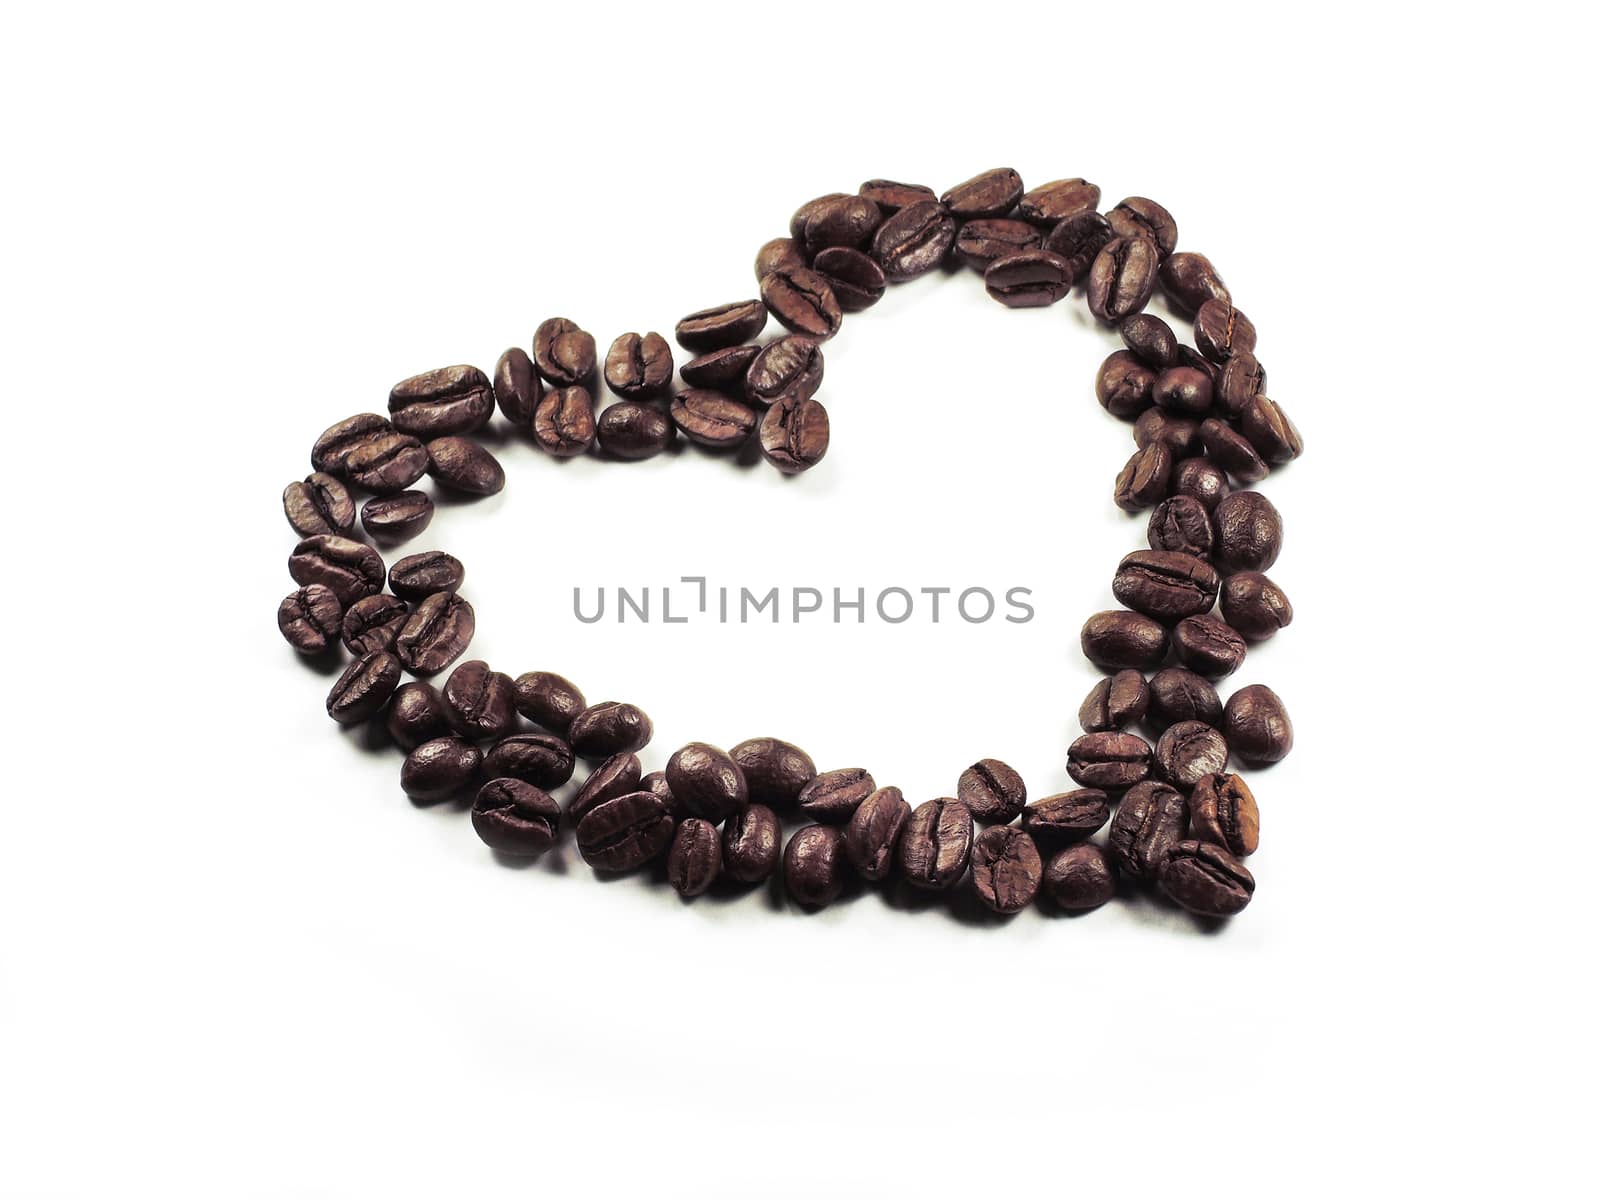 Isolate the heart of the coffee beans closeup by butenkow